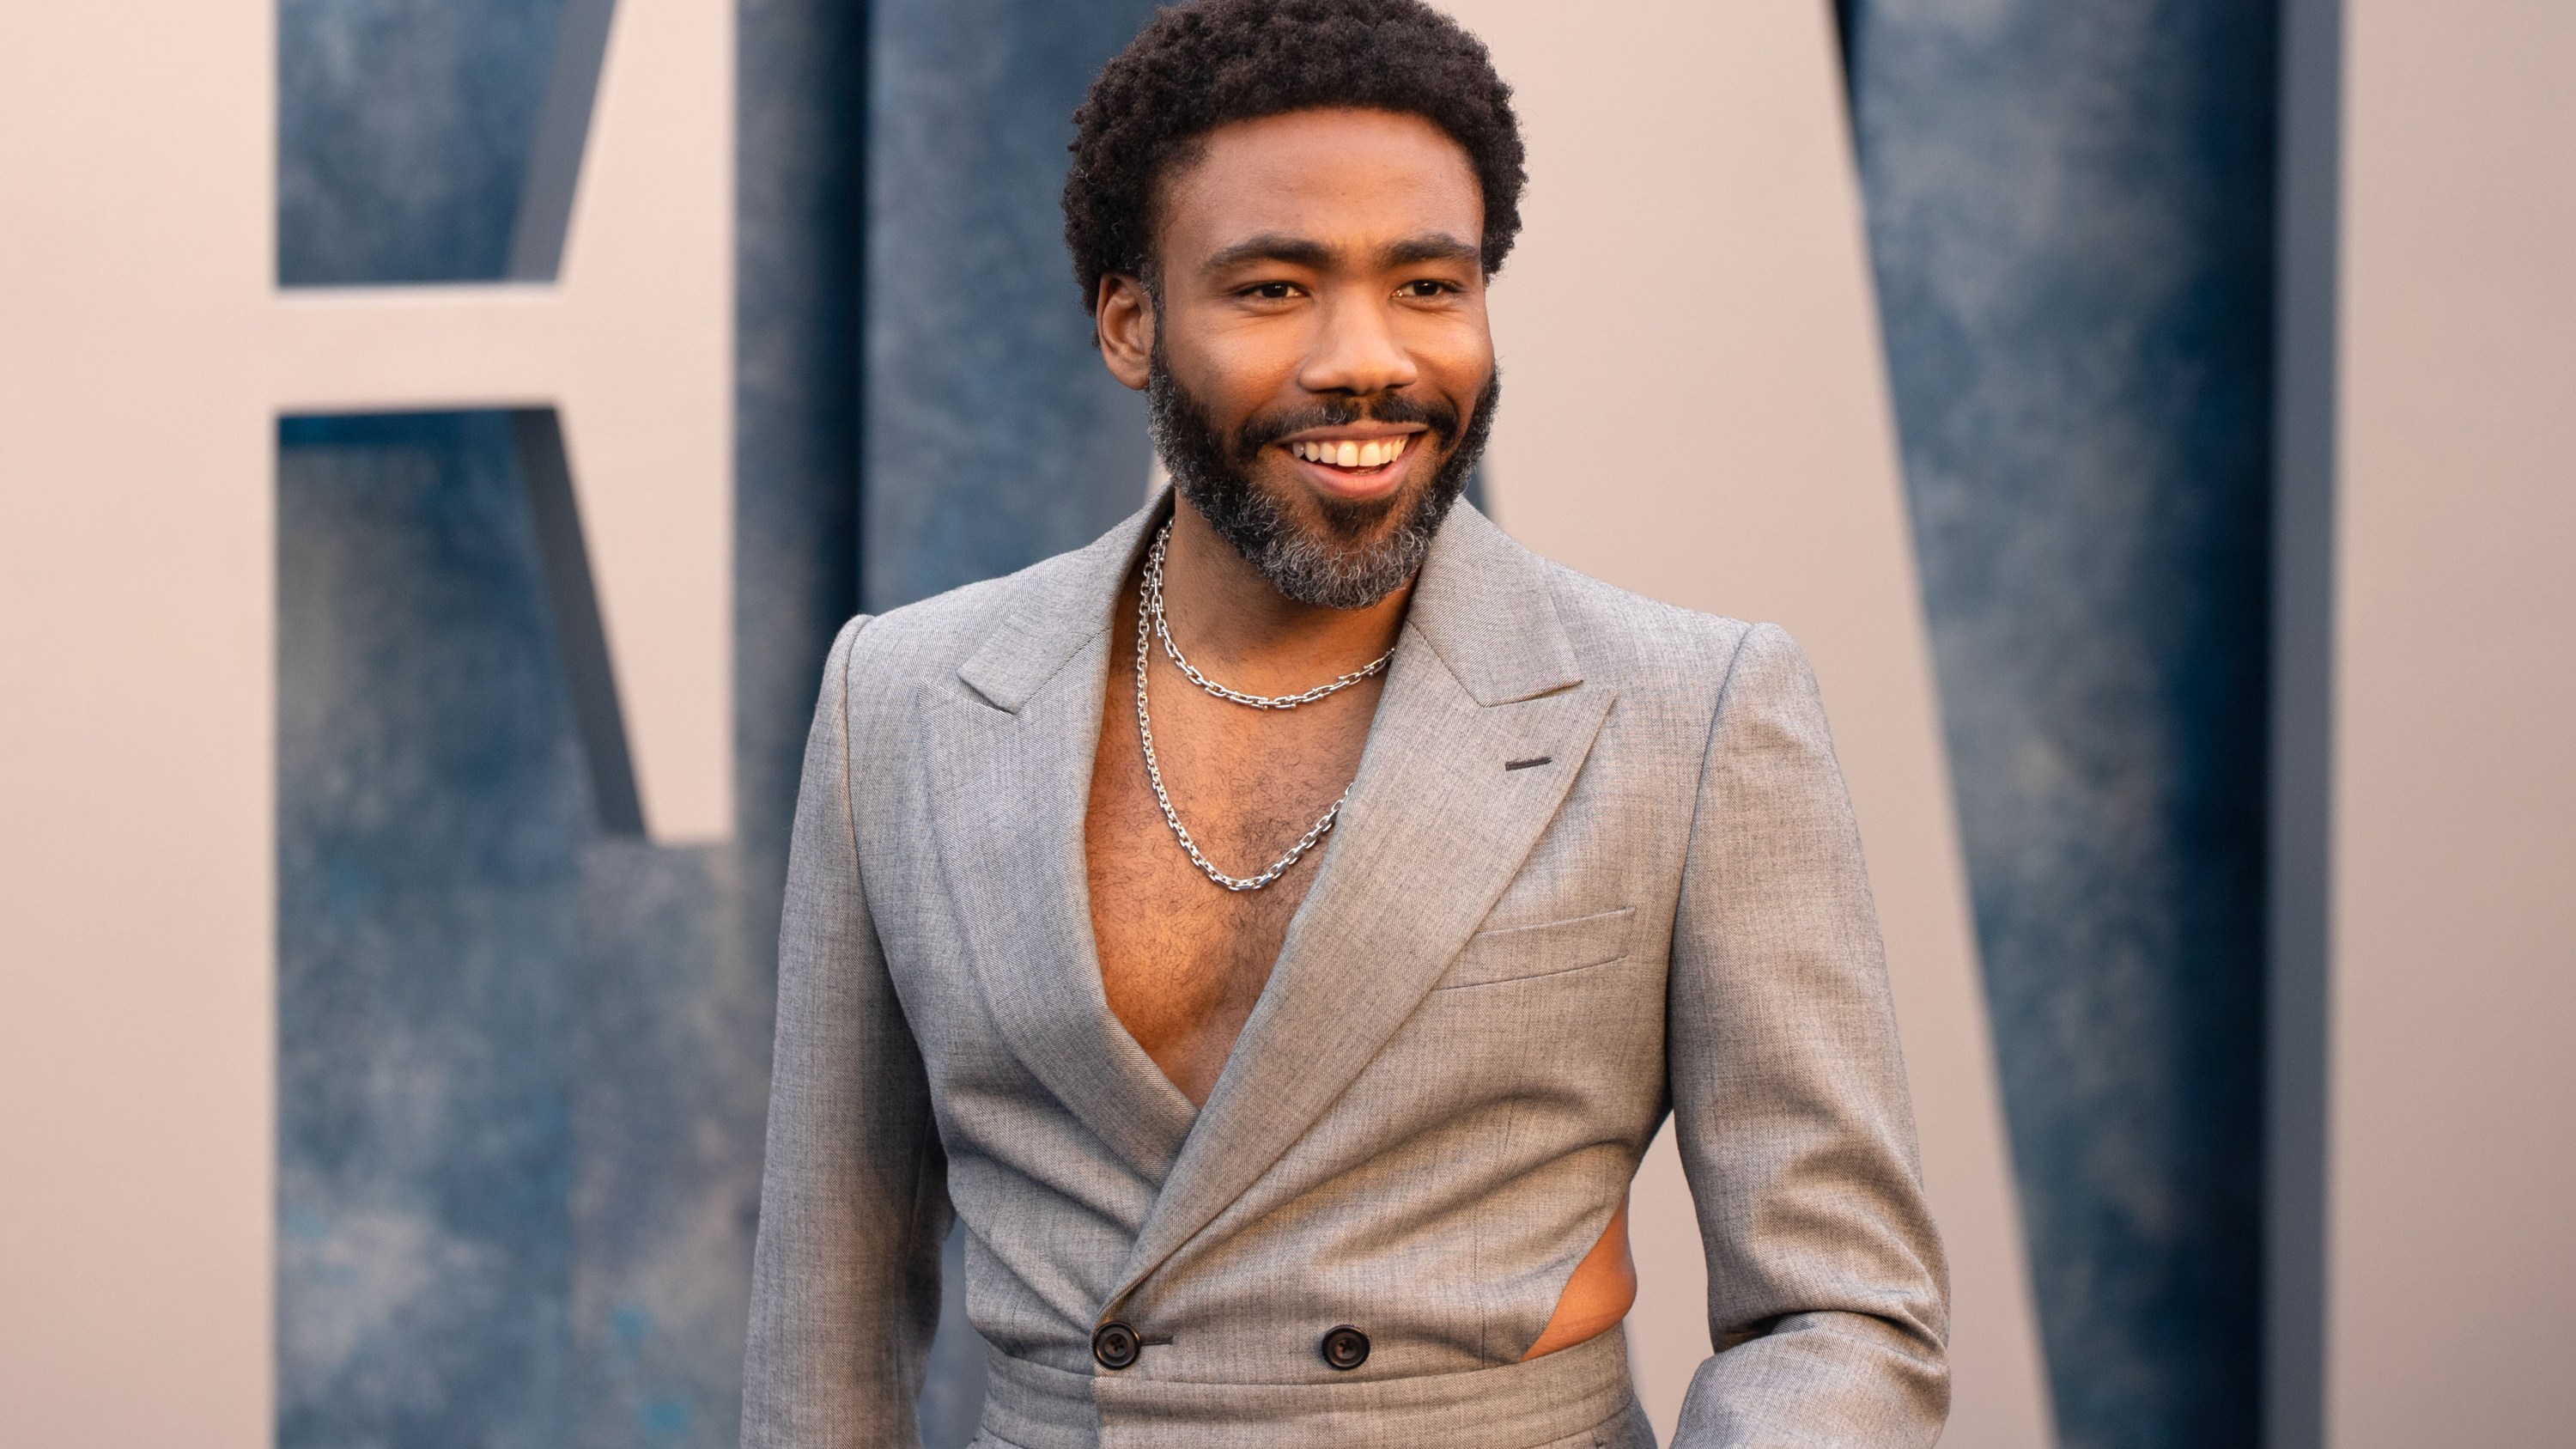 BEVERLY HILLS, CALIFORNIA - MARCH 12: Donald Glover attends the 2023 Vanity Fair Oscar Party Dinner Arrivals at Wallis Annenberg Center for the Performing Arts on March 12, 2023 in Beverly Hills, California. (Photo by Robert Smith/Patrick McMullan via Getty Images)